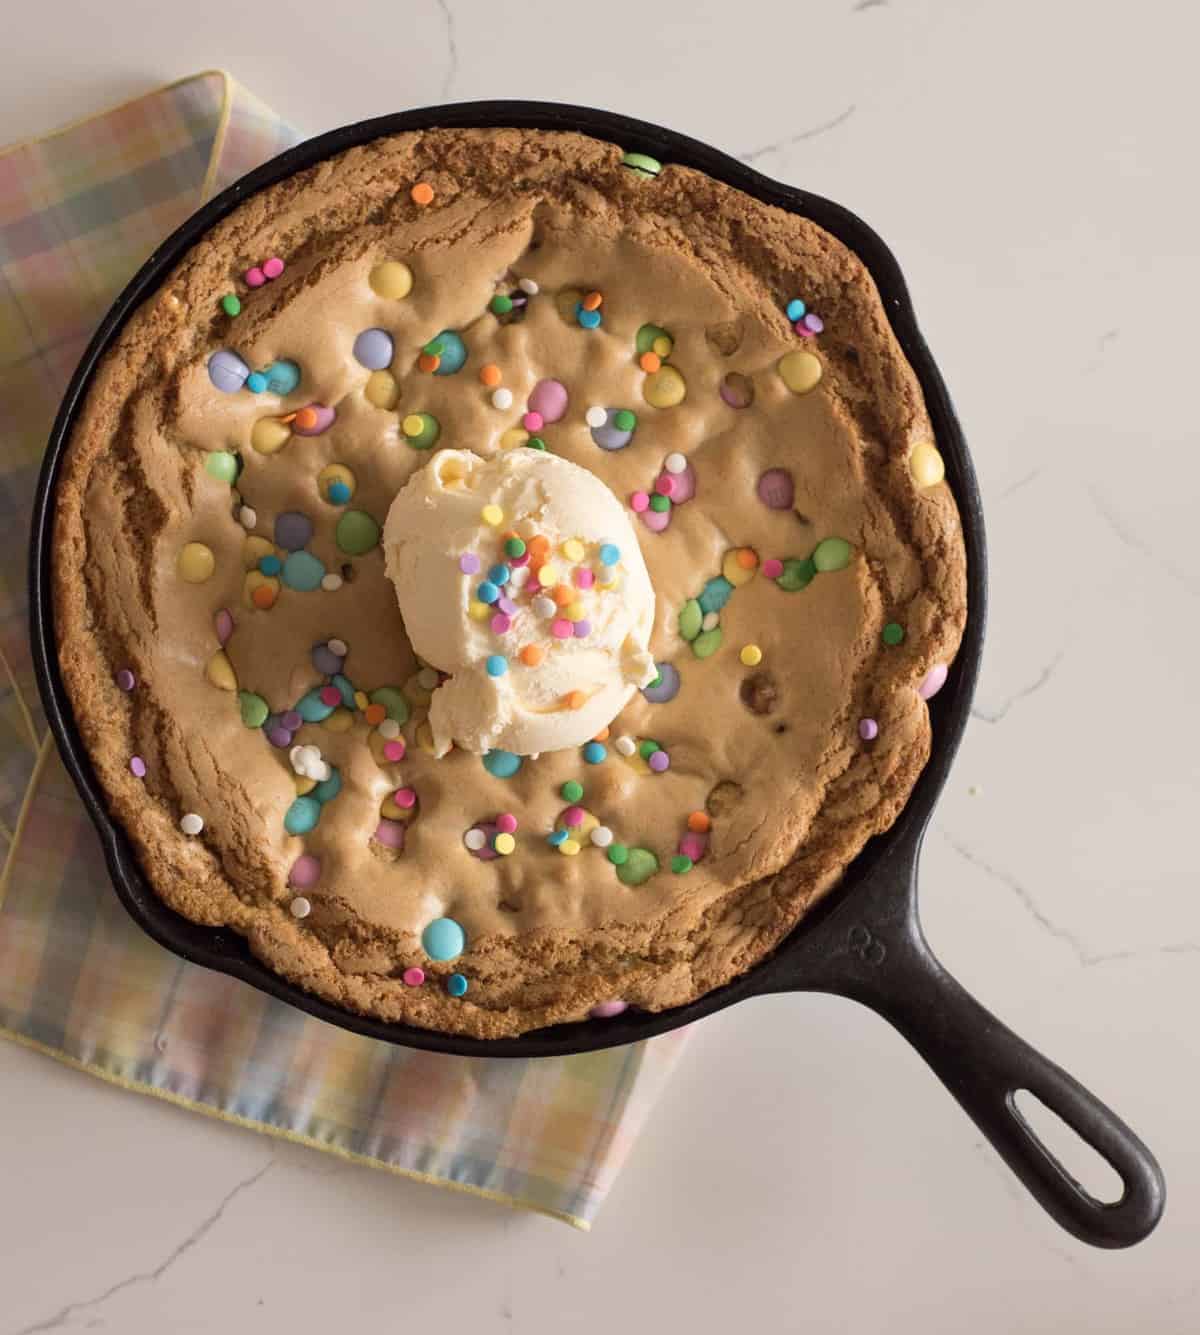 Easy skillet cookie recipe that is baked in a cast iron skillet topped with ice cream and sprinkles.